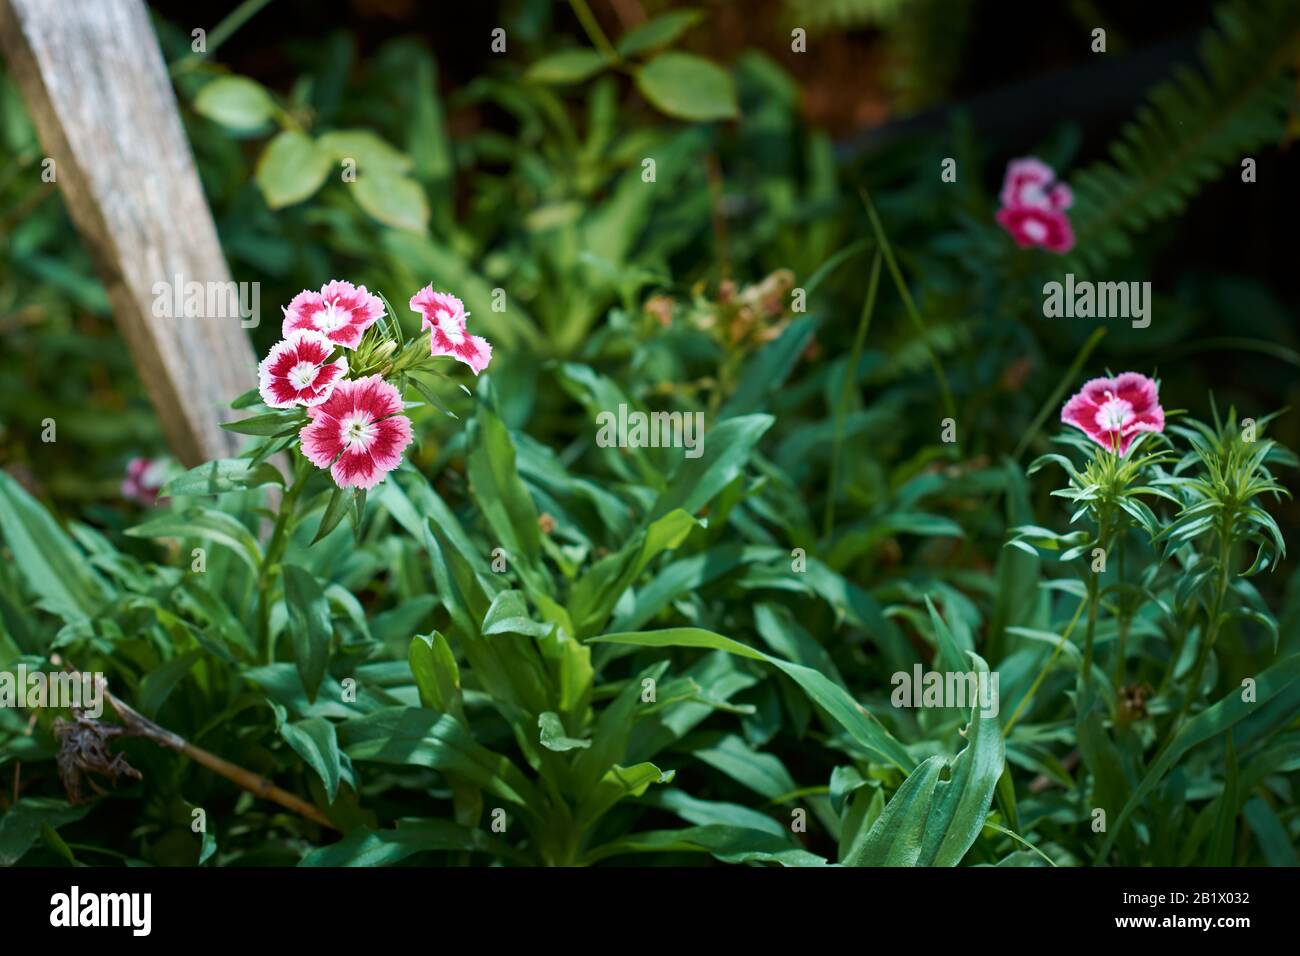 View of red flowers of Sweet William (Dianthus Barbatus) in the garden of a house with blurry green background of grass. Stock Photo